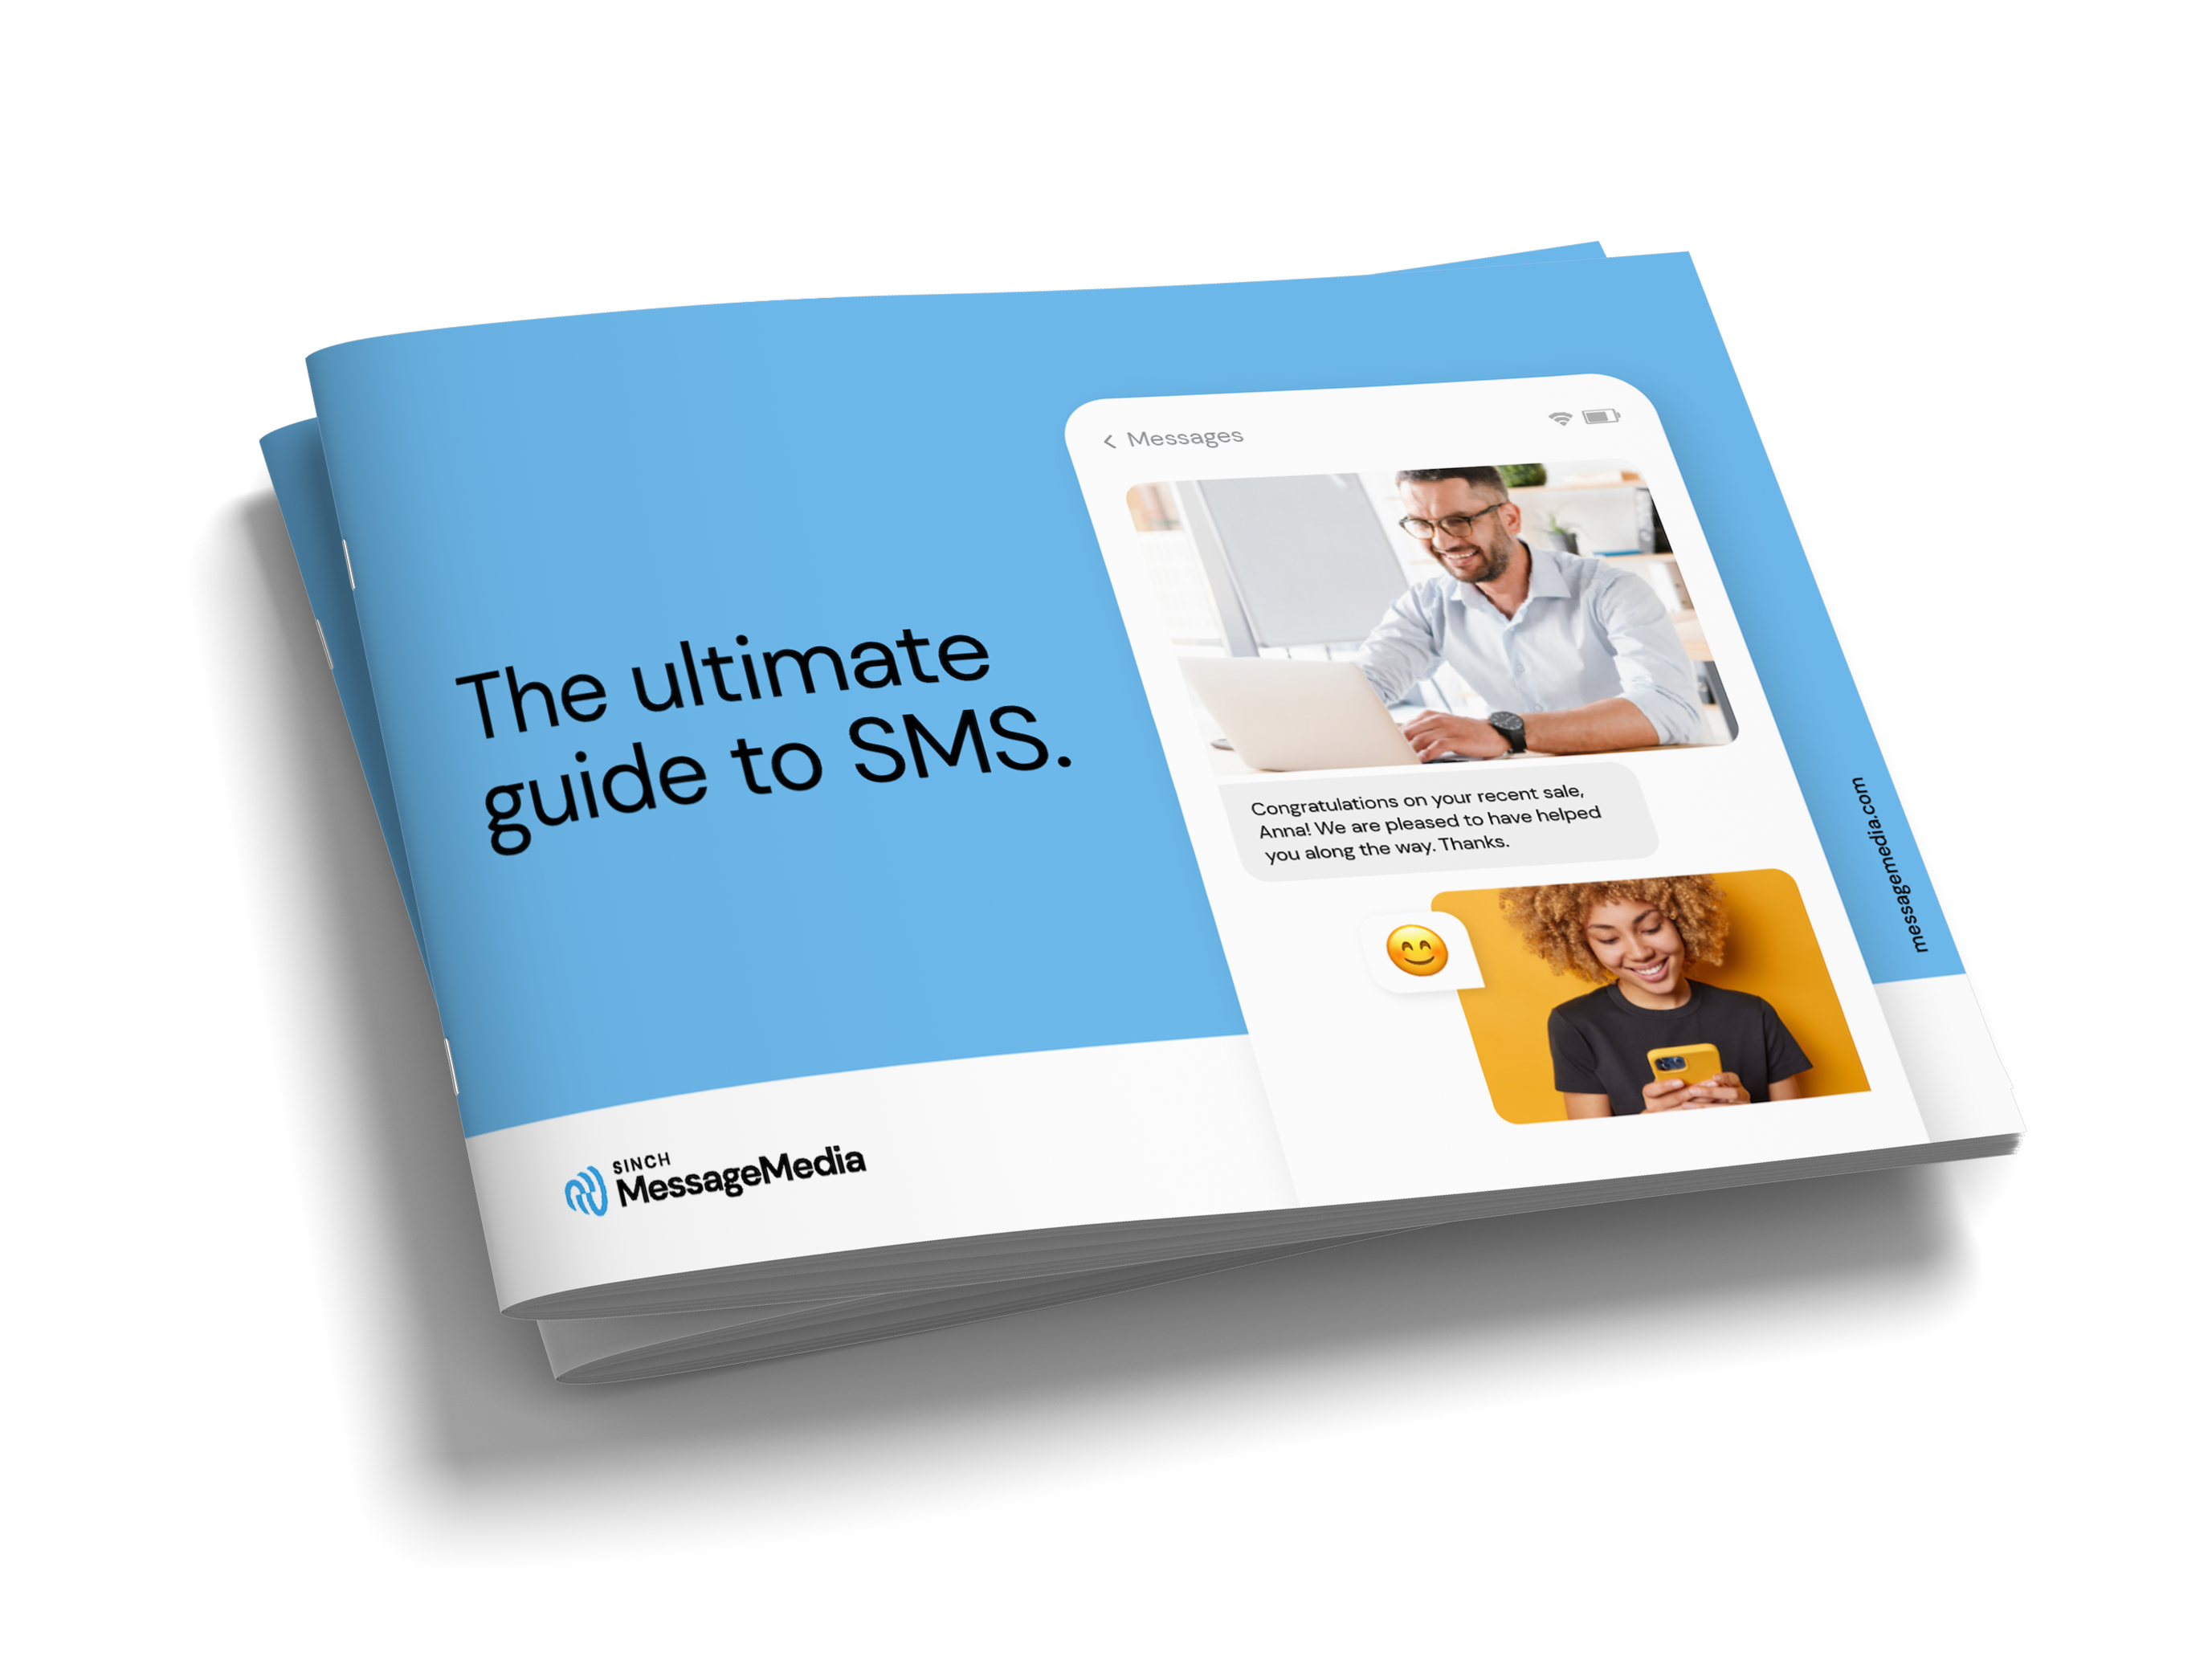 Image for The ultimate guide to SMS